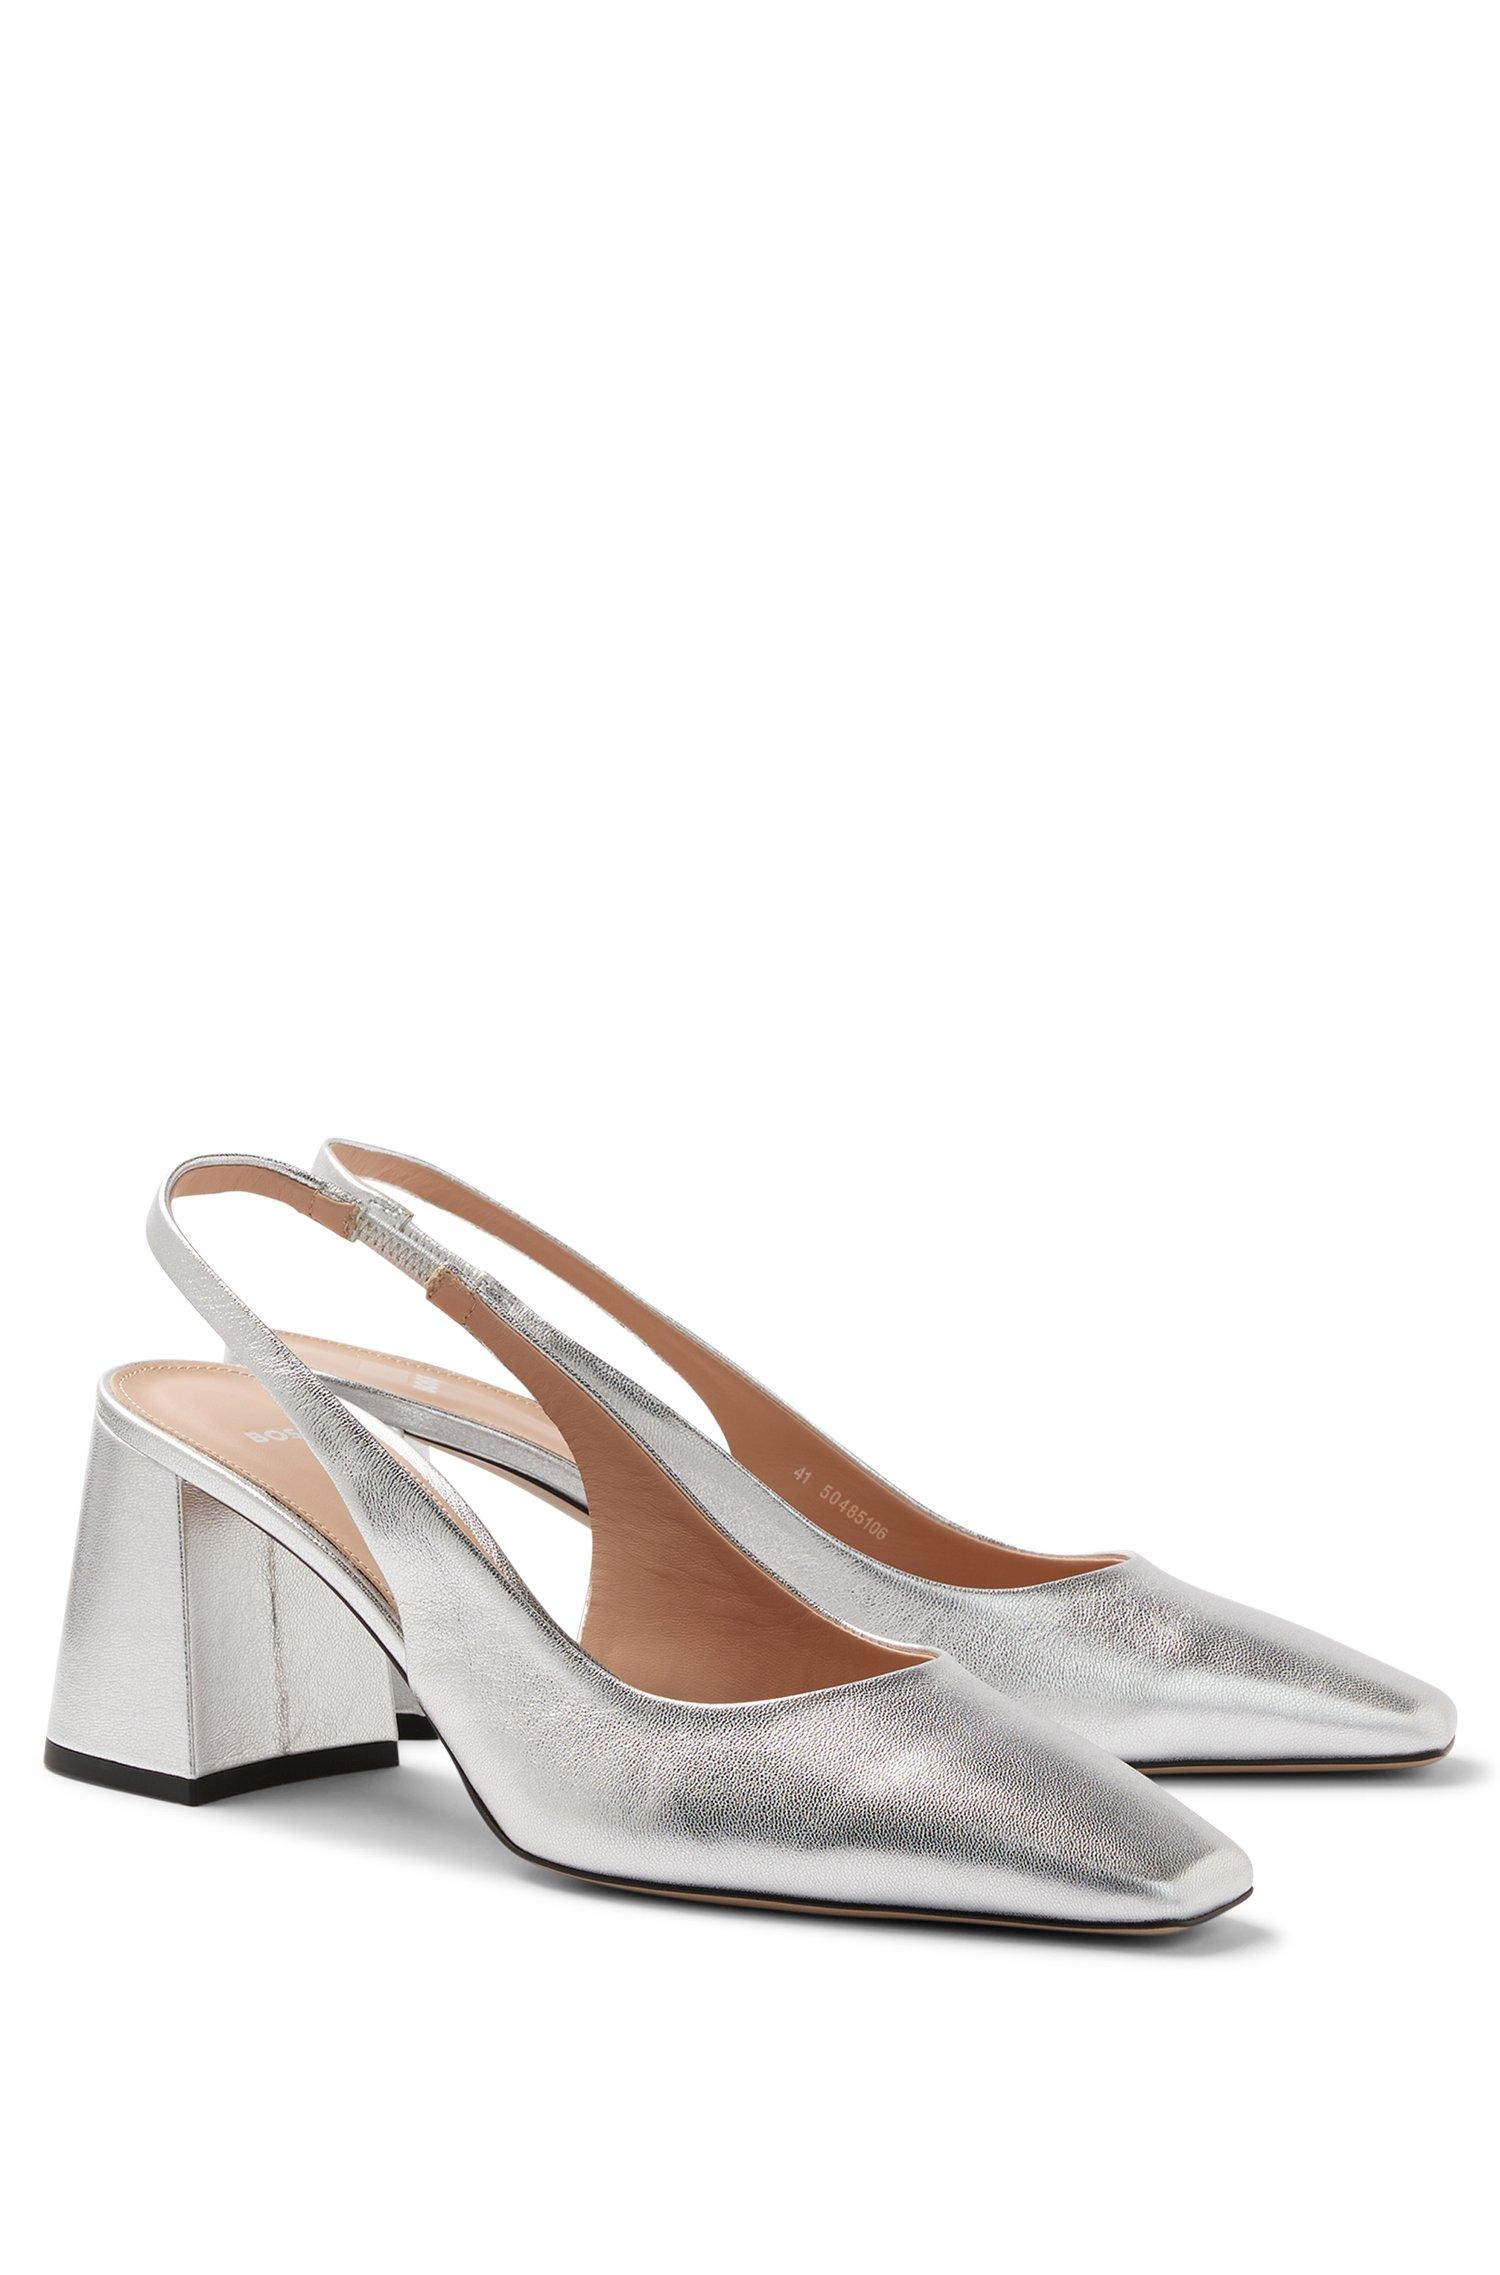 BOSS by HUGO BOSS Slingback Pumps In Laminated Italian Leather in White |  Lyst UK